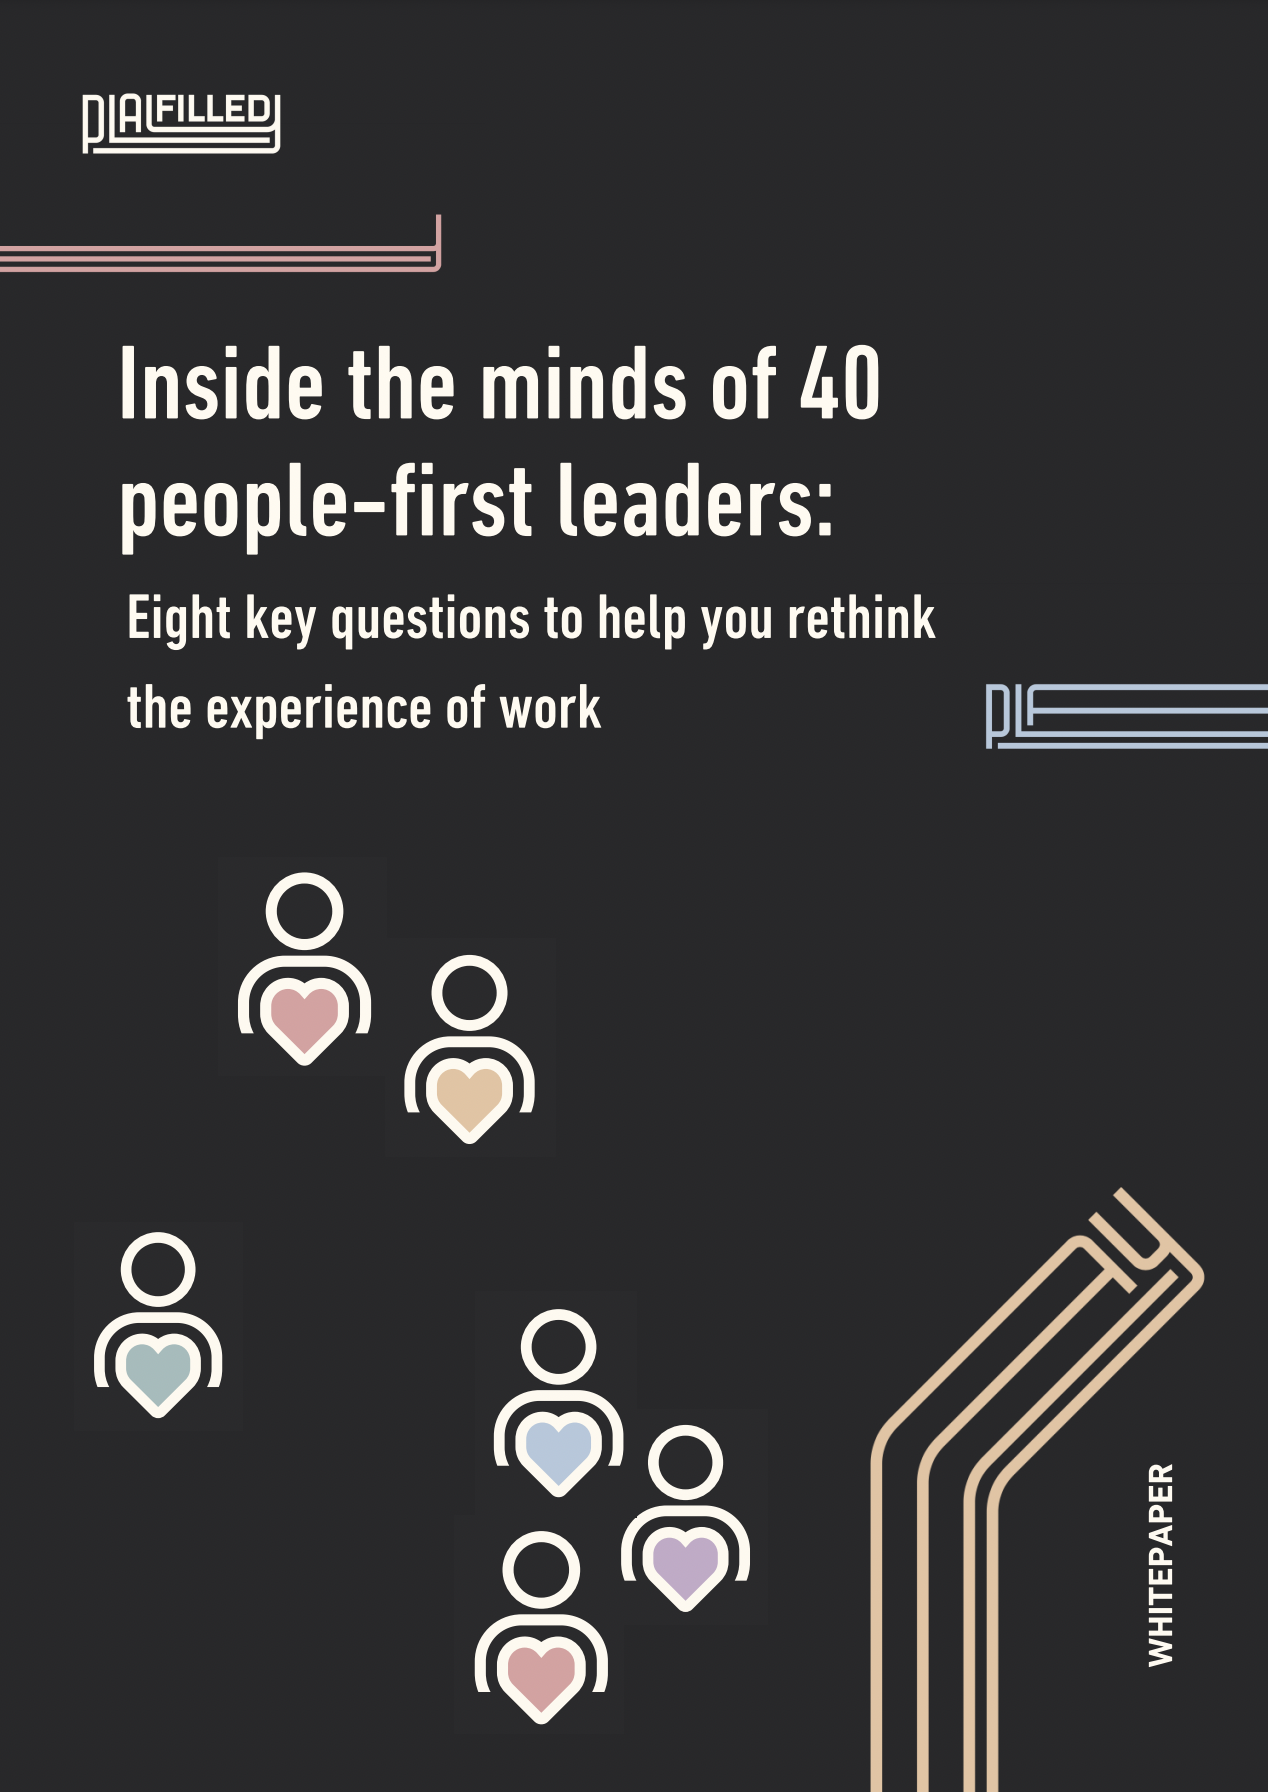 Inside the minds of 40 people-first leaders